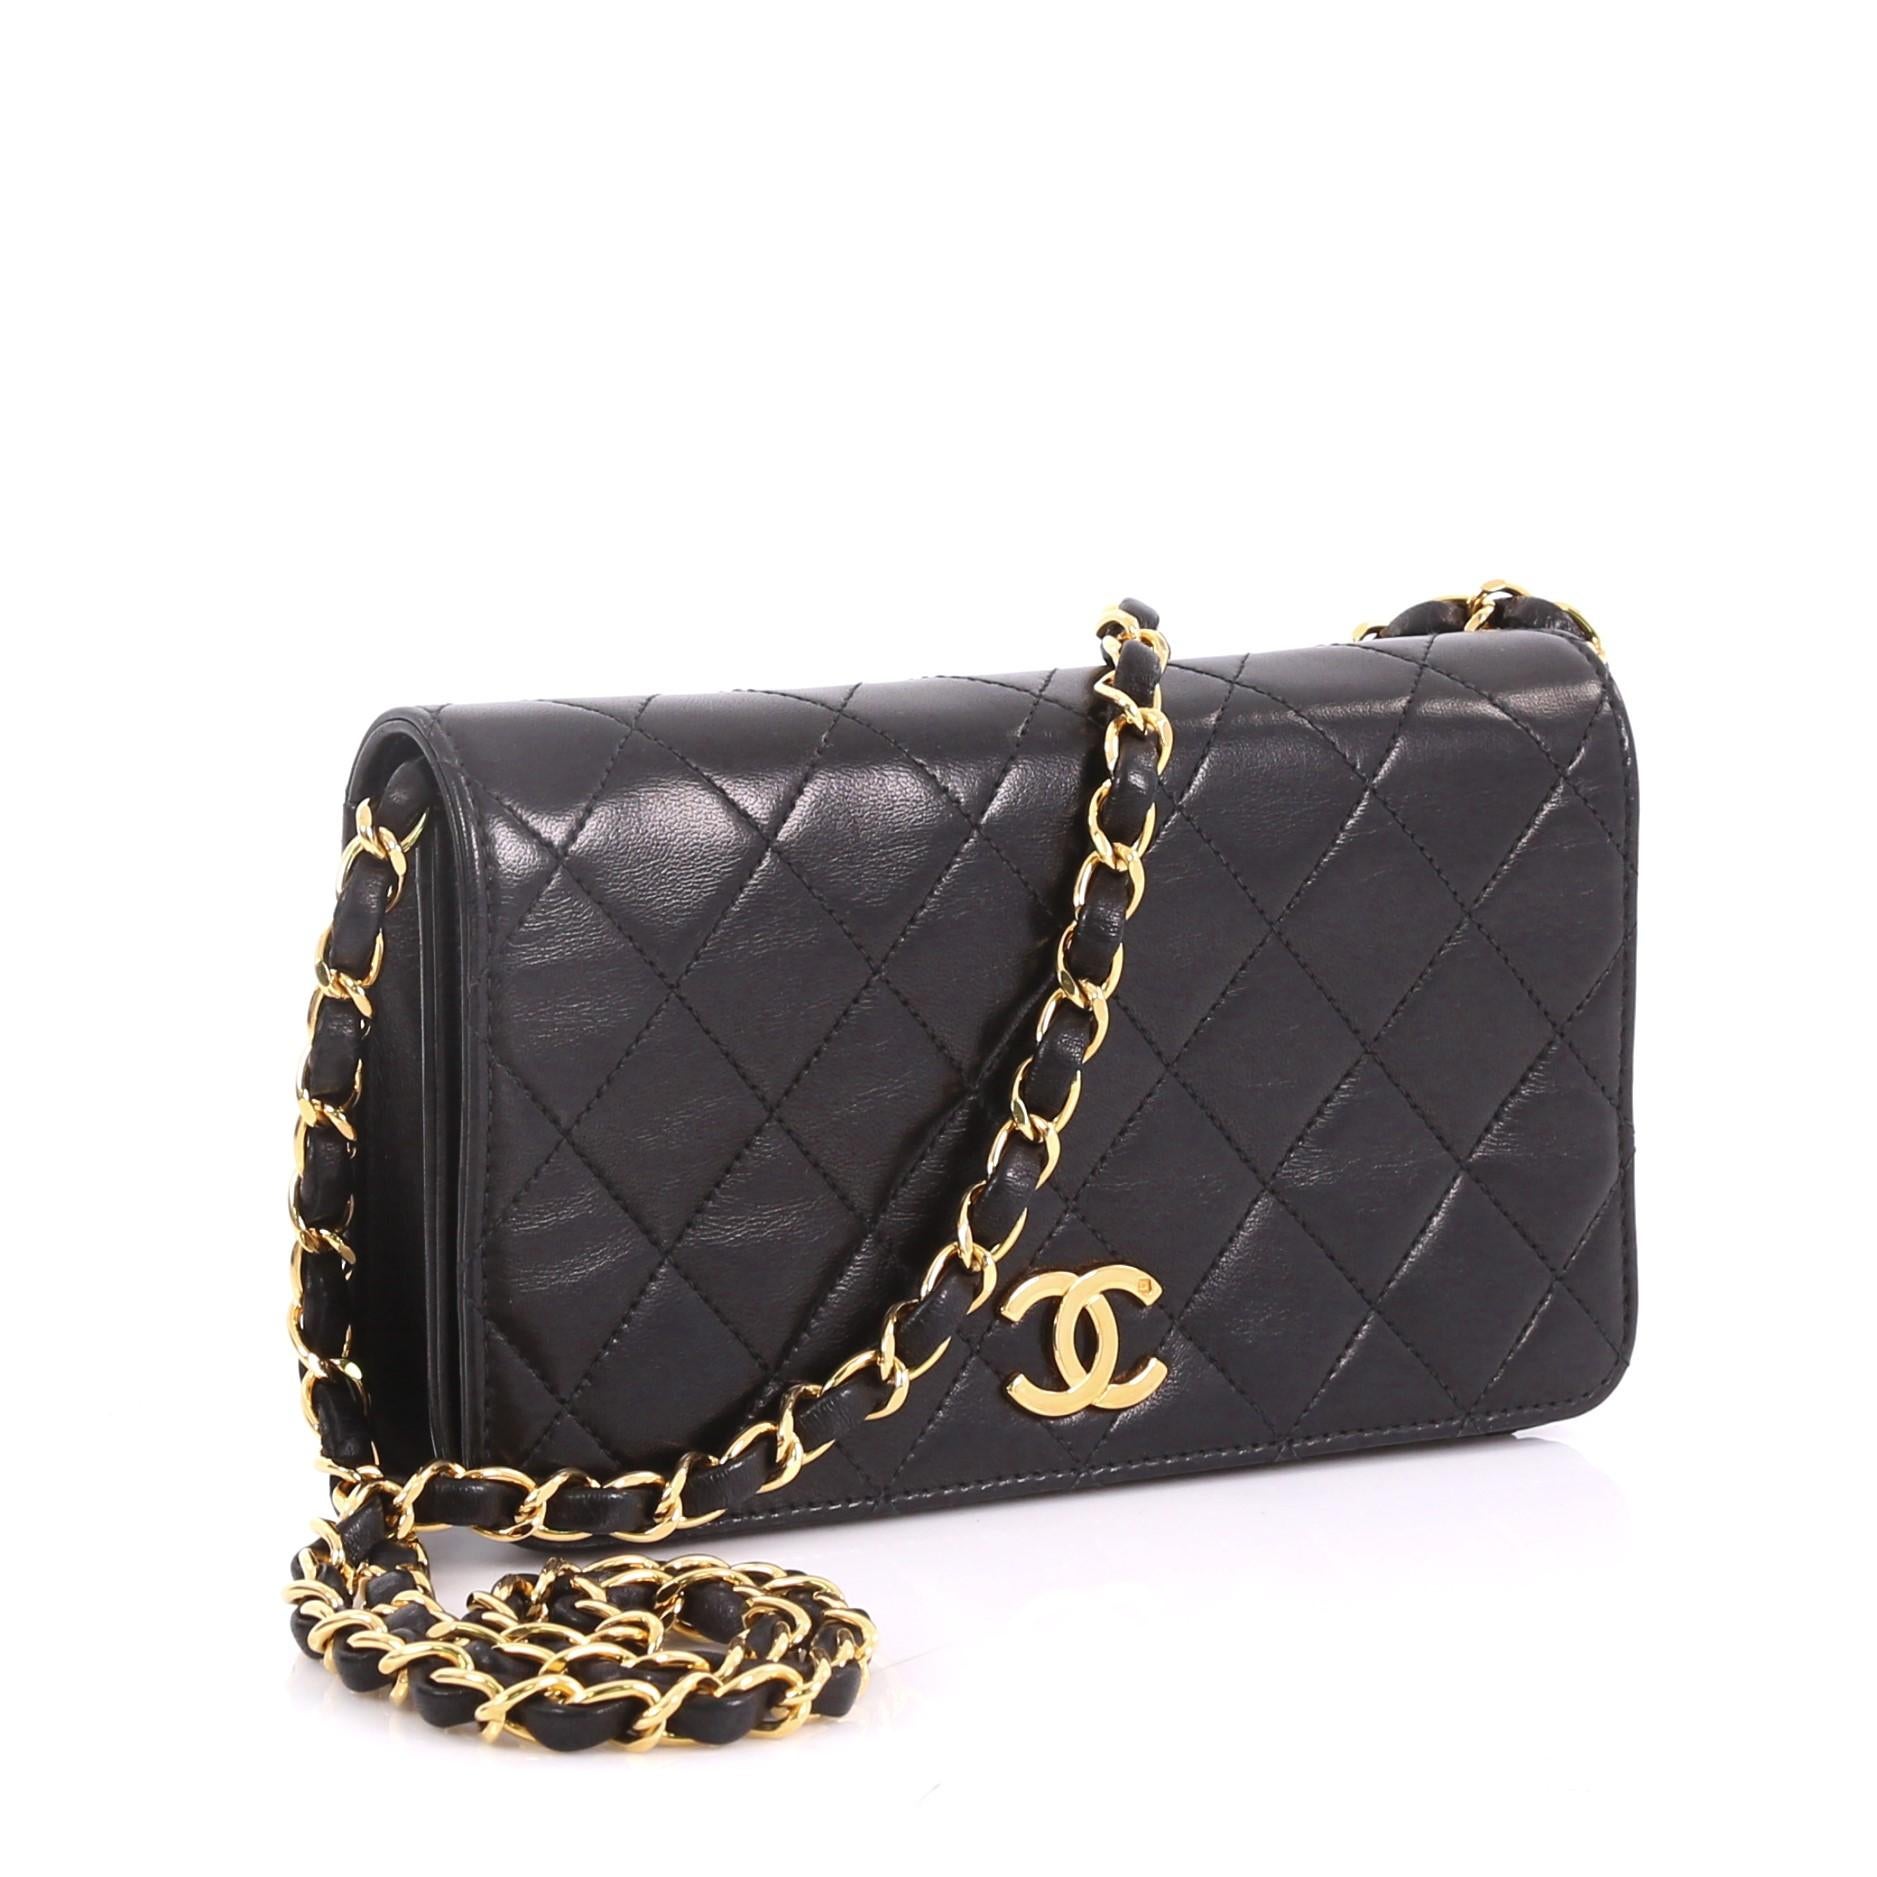 Black Chanel Vintage Full Flap Bag Quilted Lambskin Mini